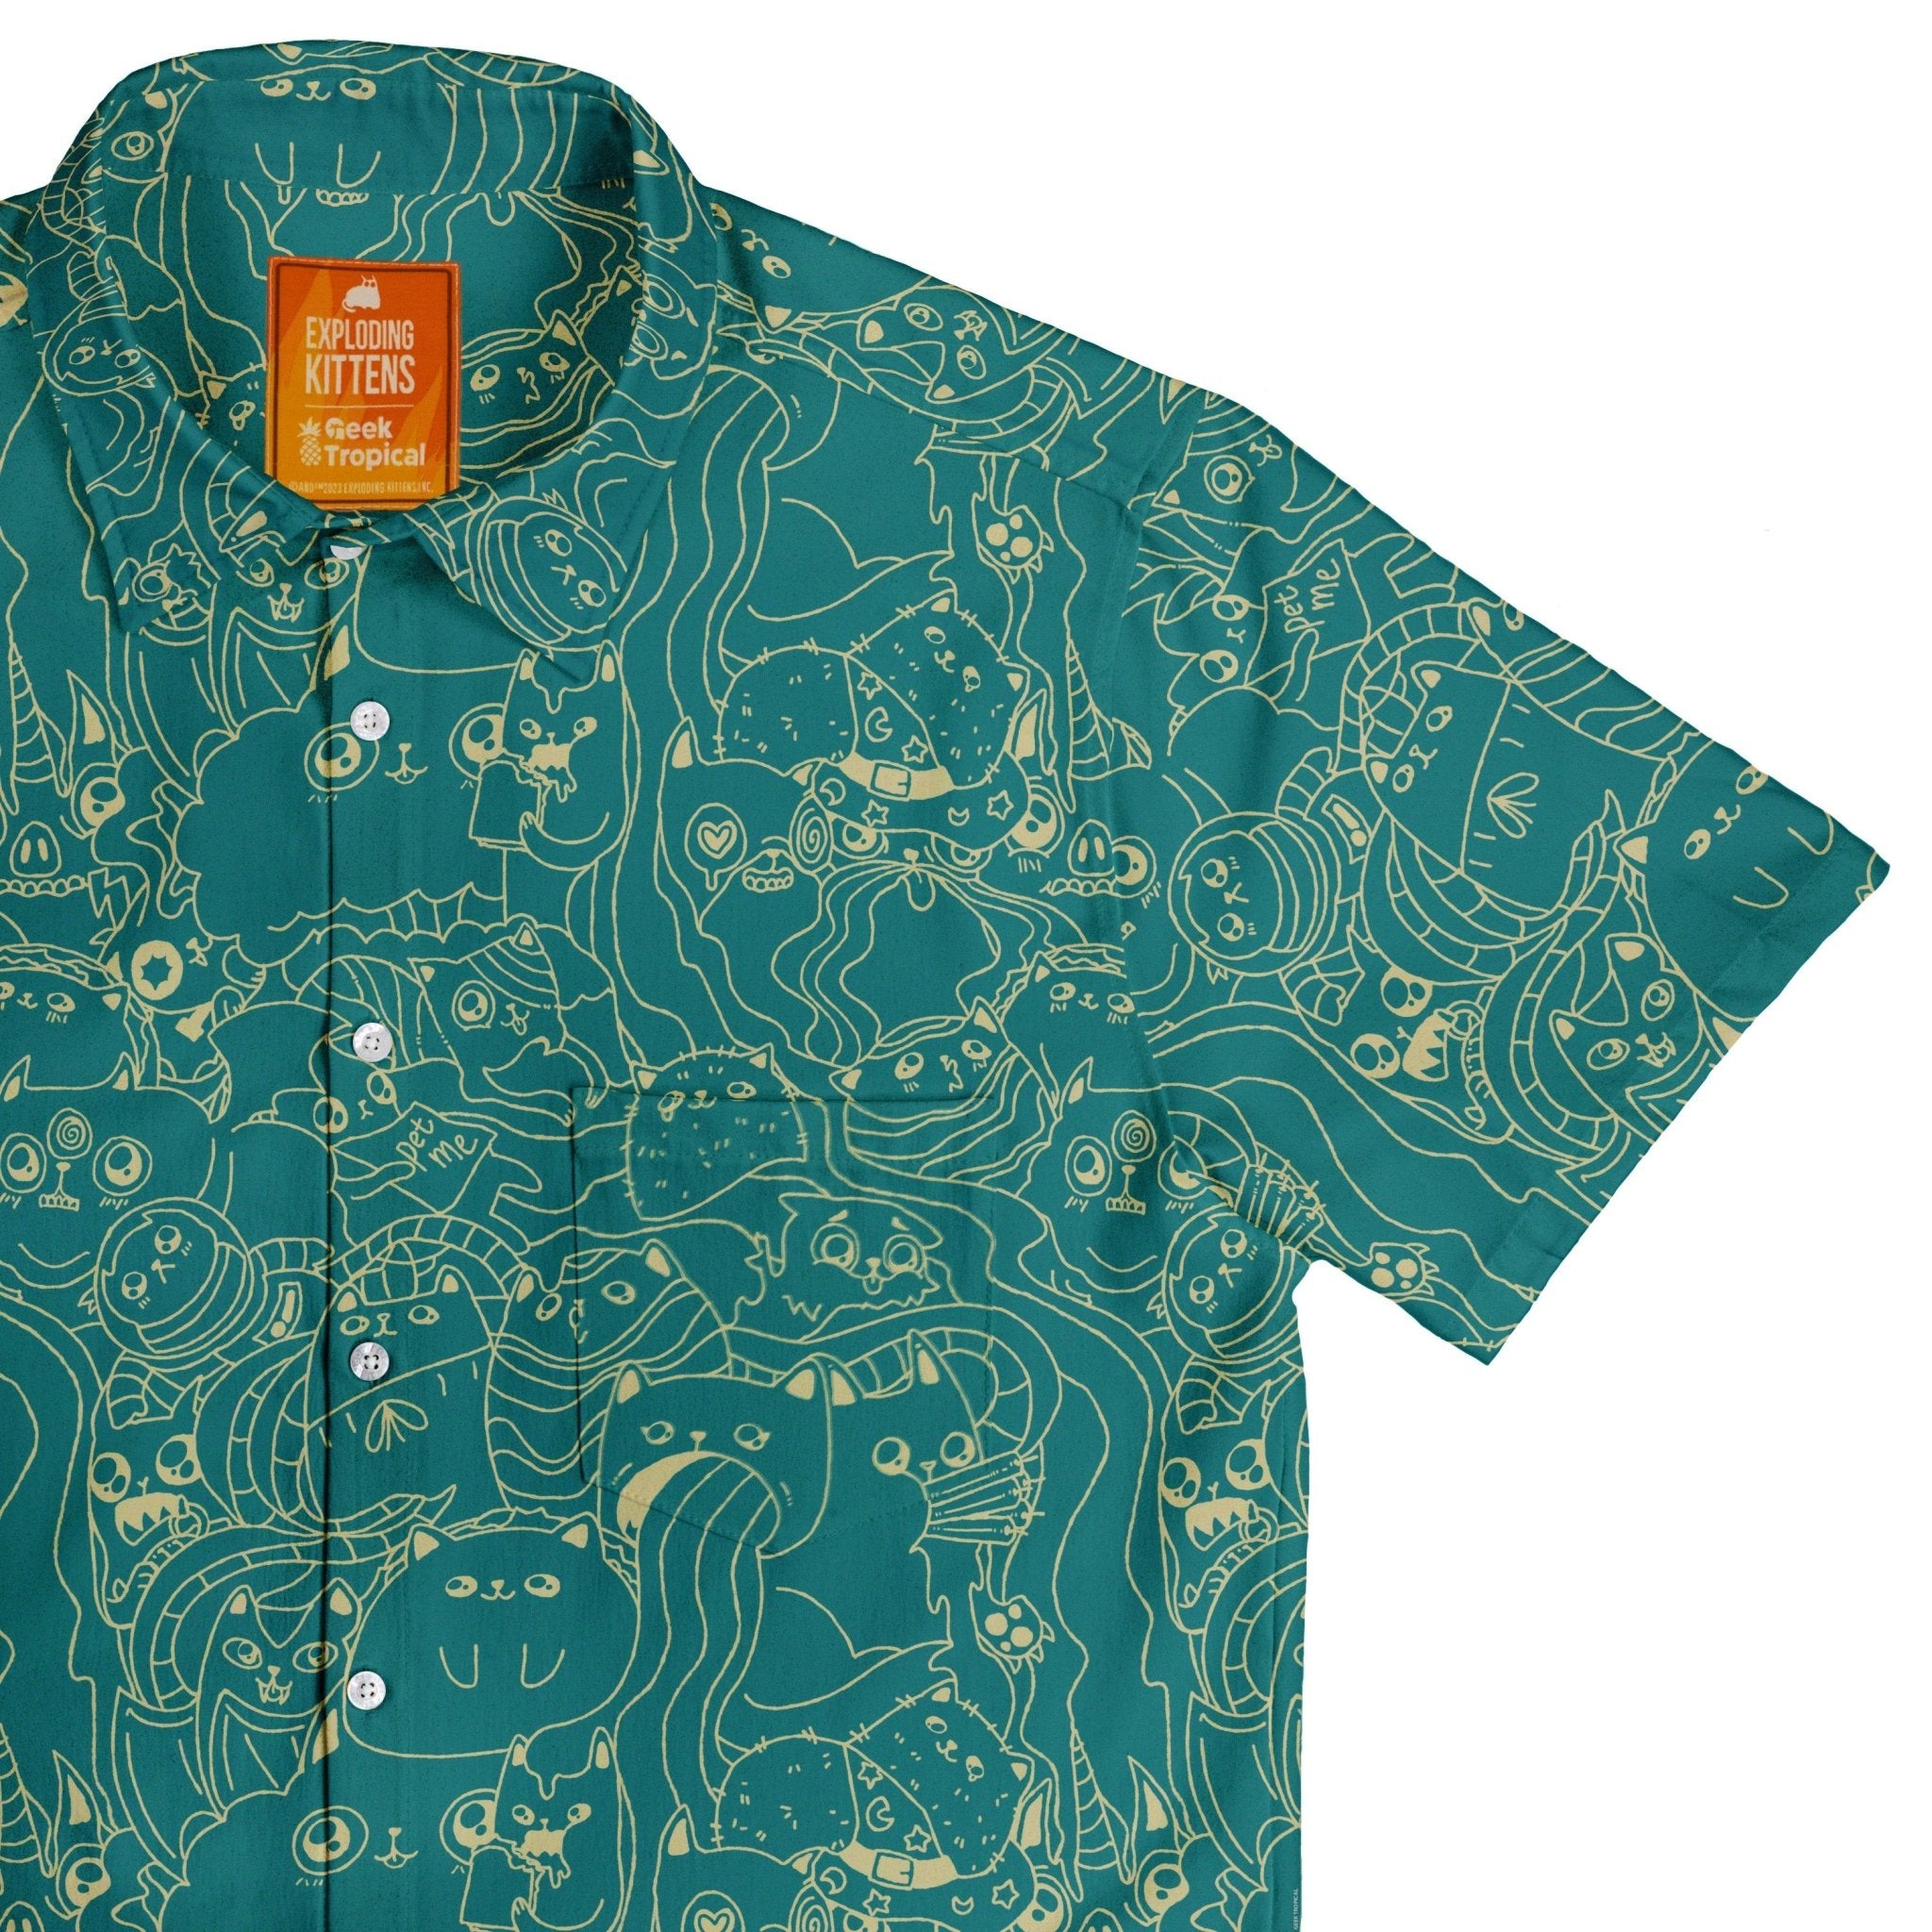 Exploding Kittens Mashup Mossy Teal Button Up Shirt - adult sizing - Animal Patterns - board game print